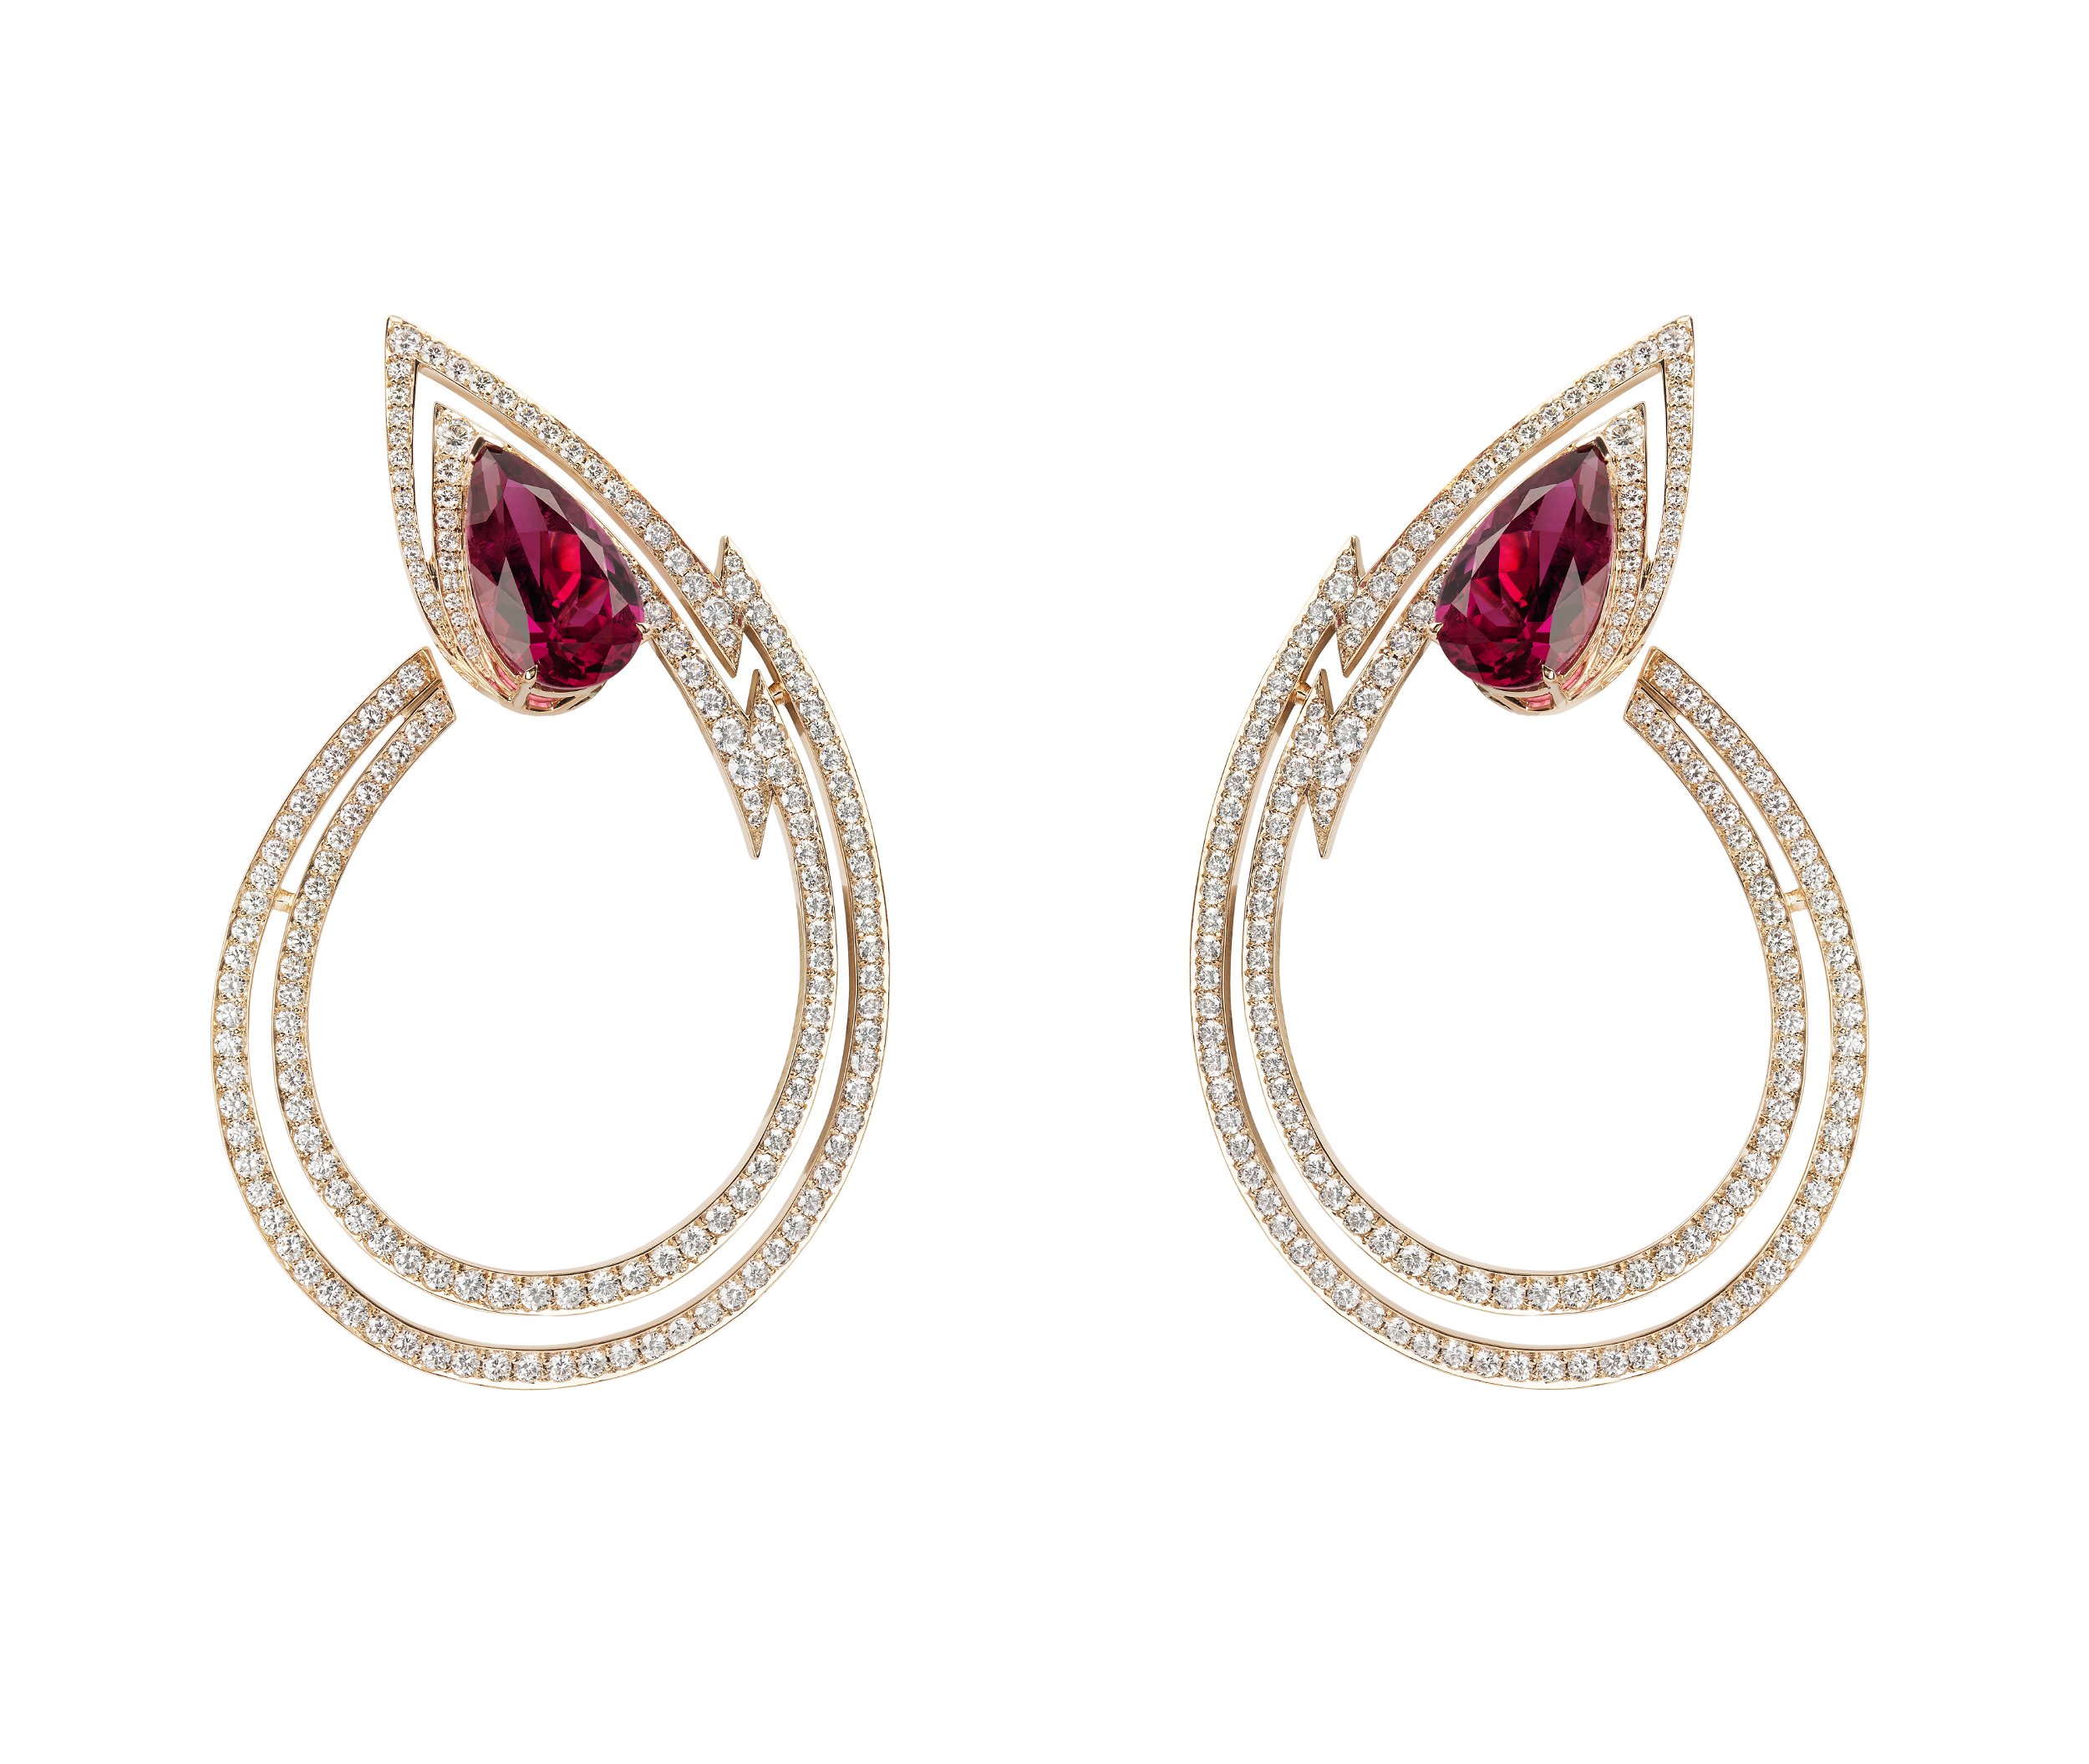 Lady Stardust Couture Earrings with Rubellite and White Diamonds in 18kt Rose Gold